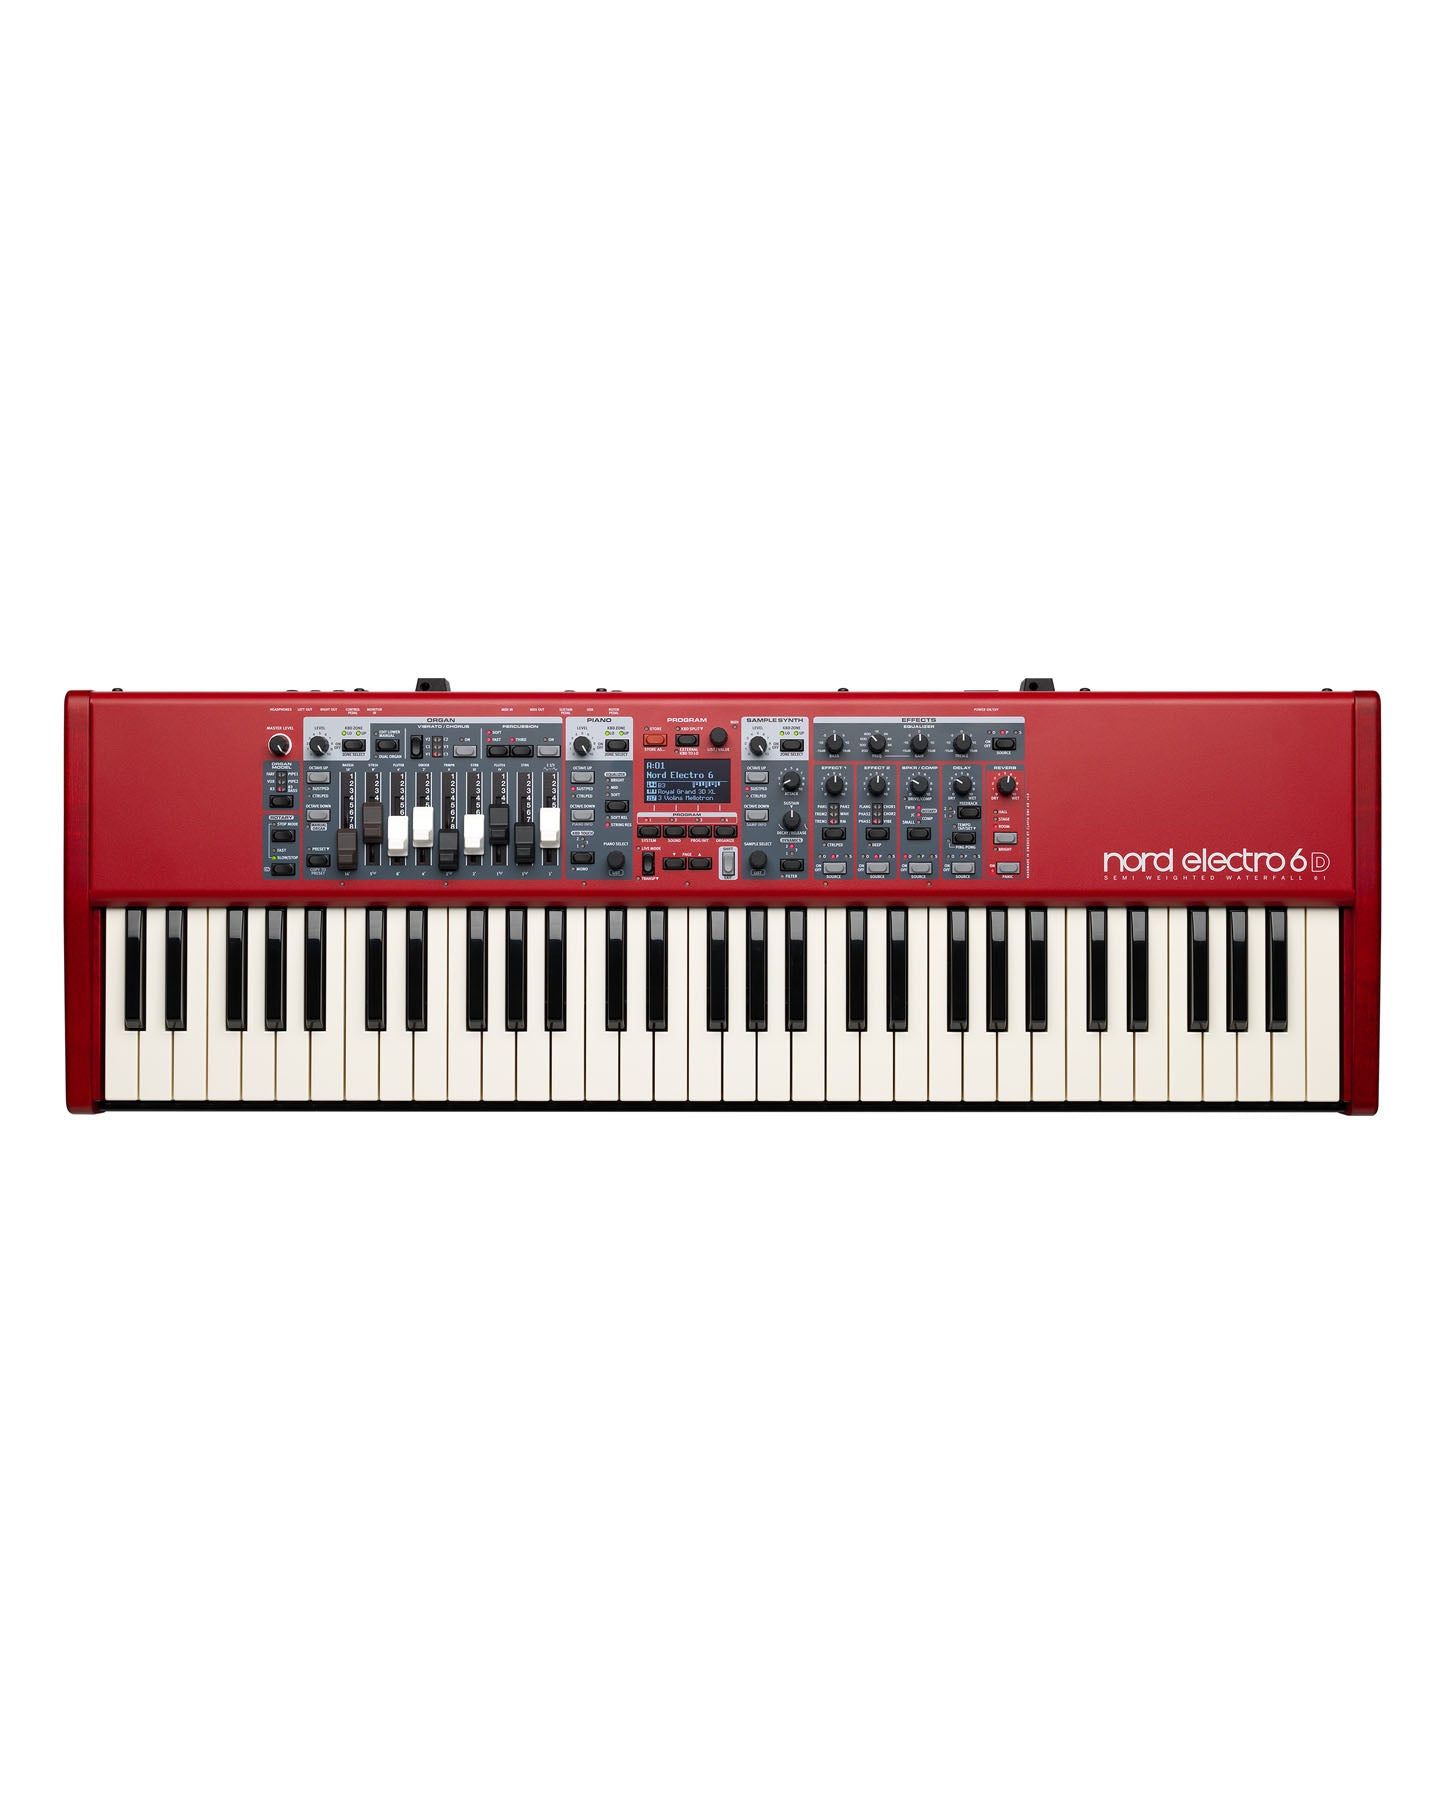 Electro 6D 61-Key Semi-Weighted Keyboard